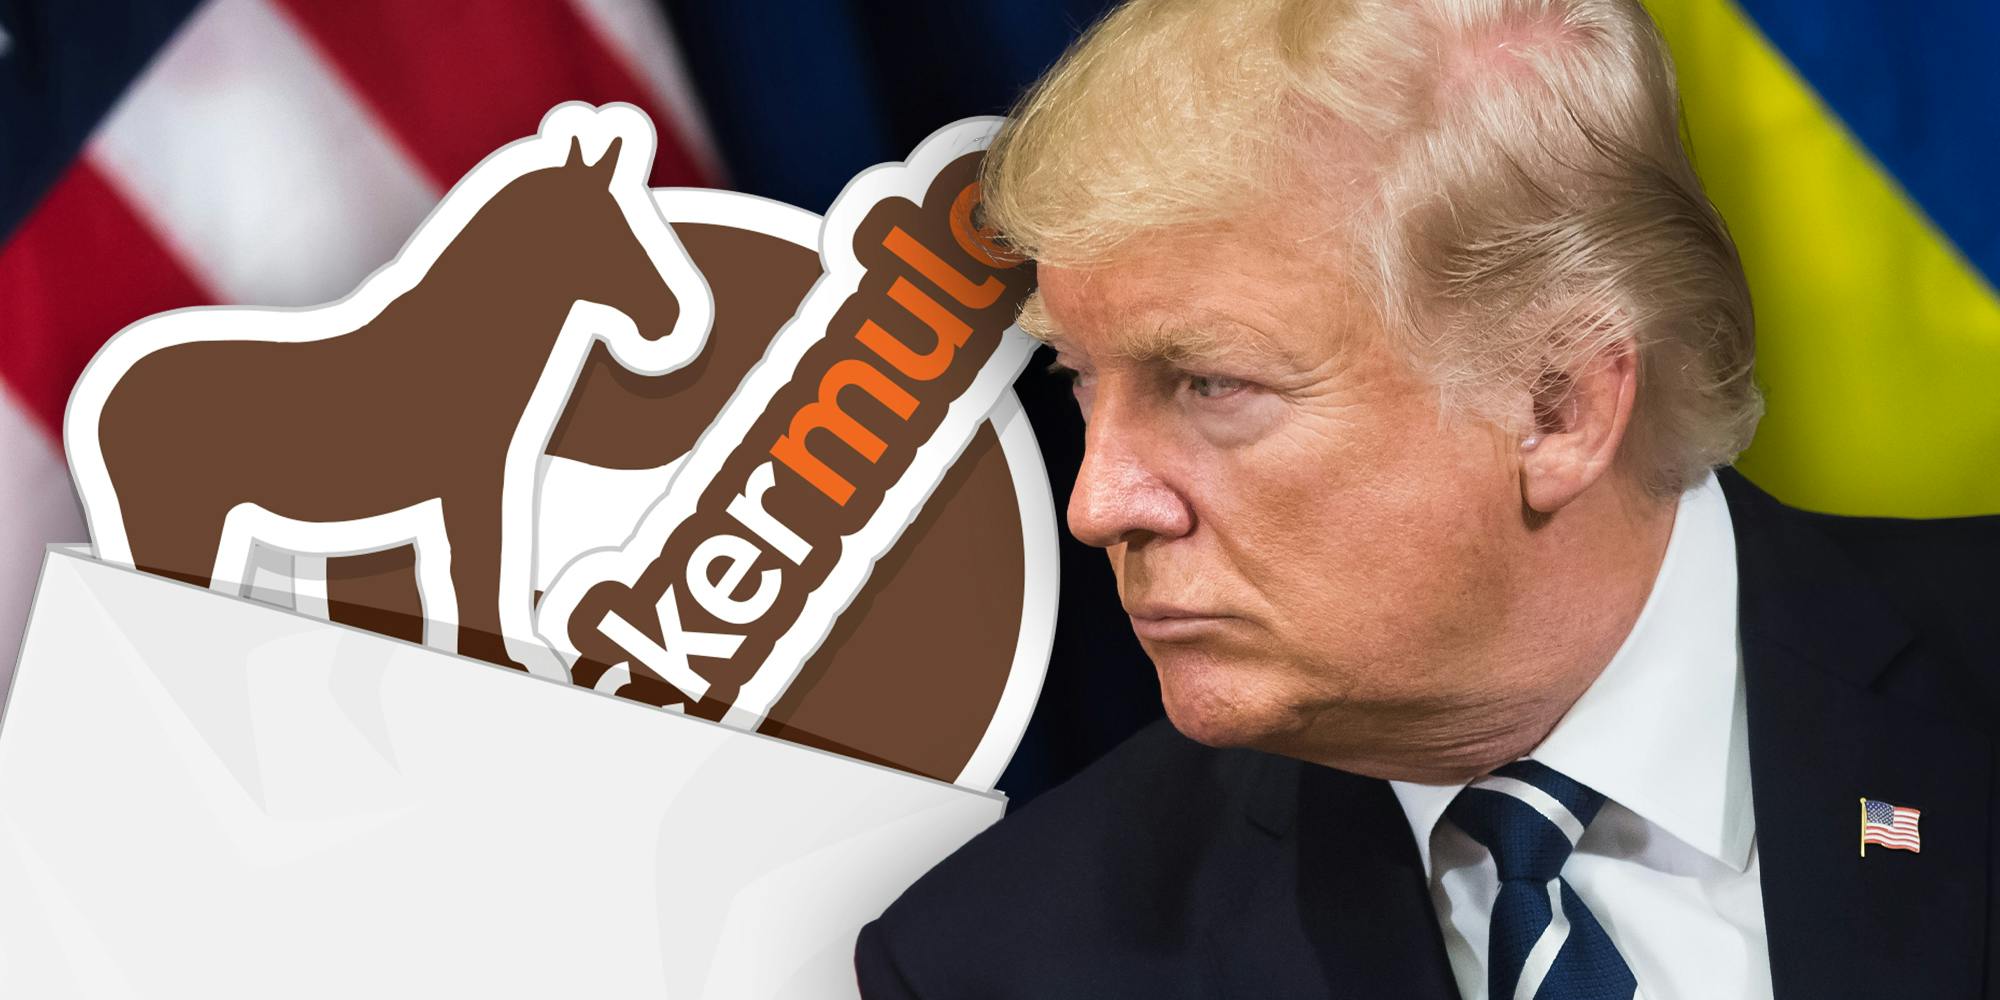 Sticker Mule is posting emails from their critics after sending out a pro-Trump missive